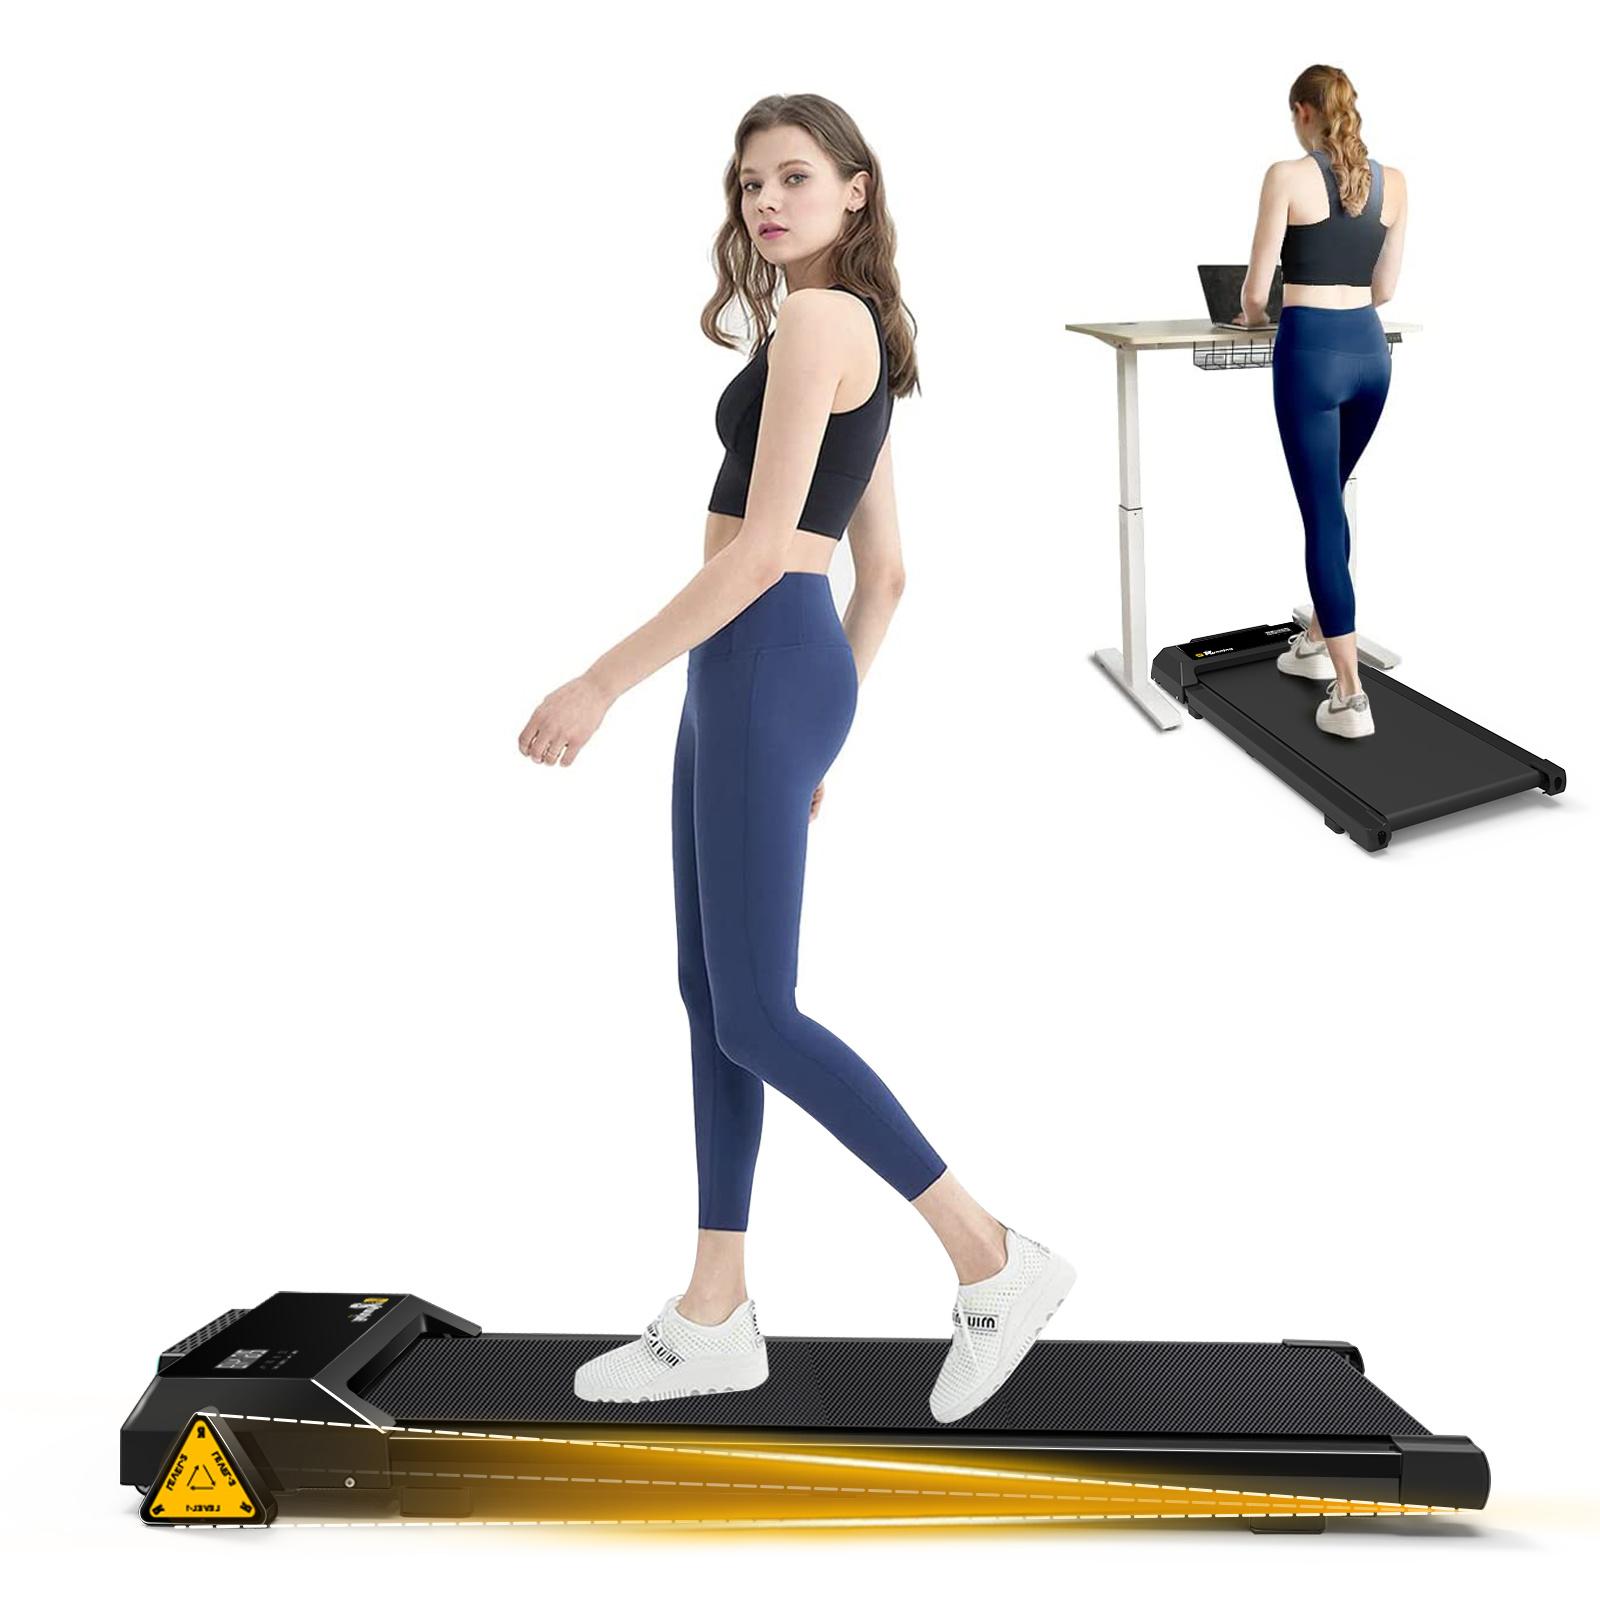 Woman using treadmill for walking and working